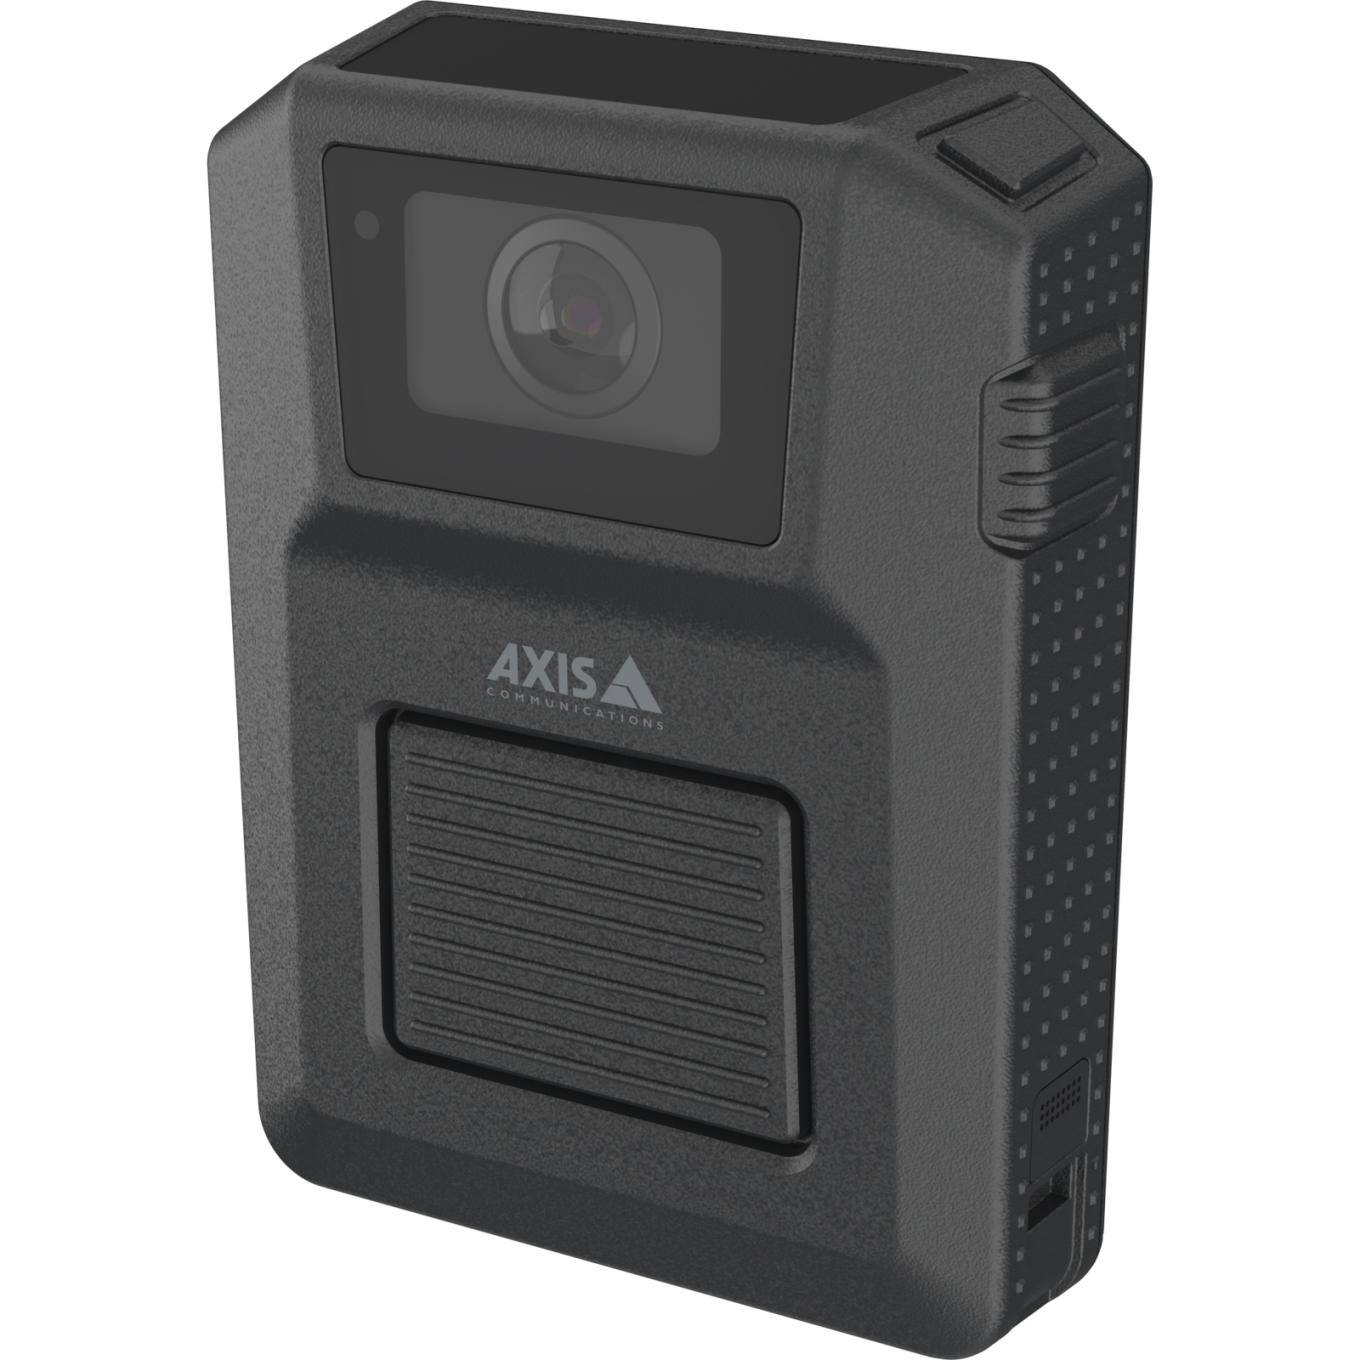 AXIS W102 Body Worn Camera in black color, viewed from left angle